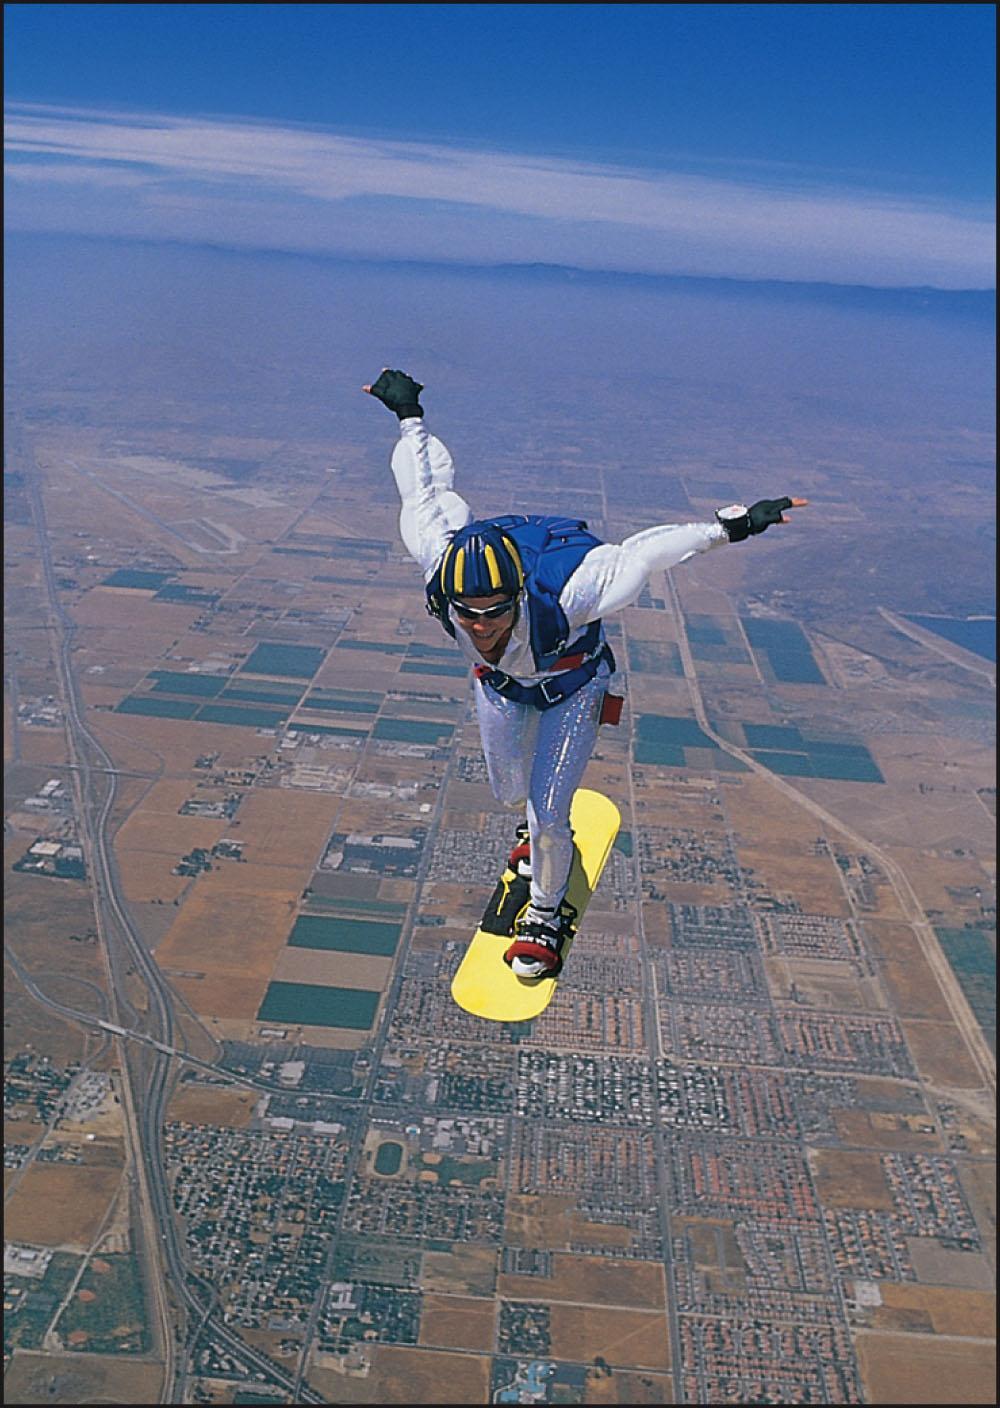 Example: Skysurfer Step from plane Initial velocity is 0 Gravity causes downward acceleration Downward speed increases, but so